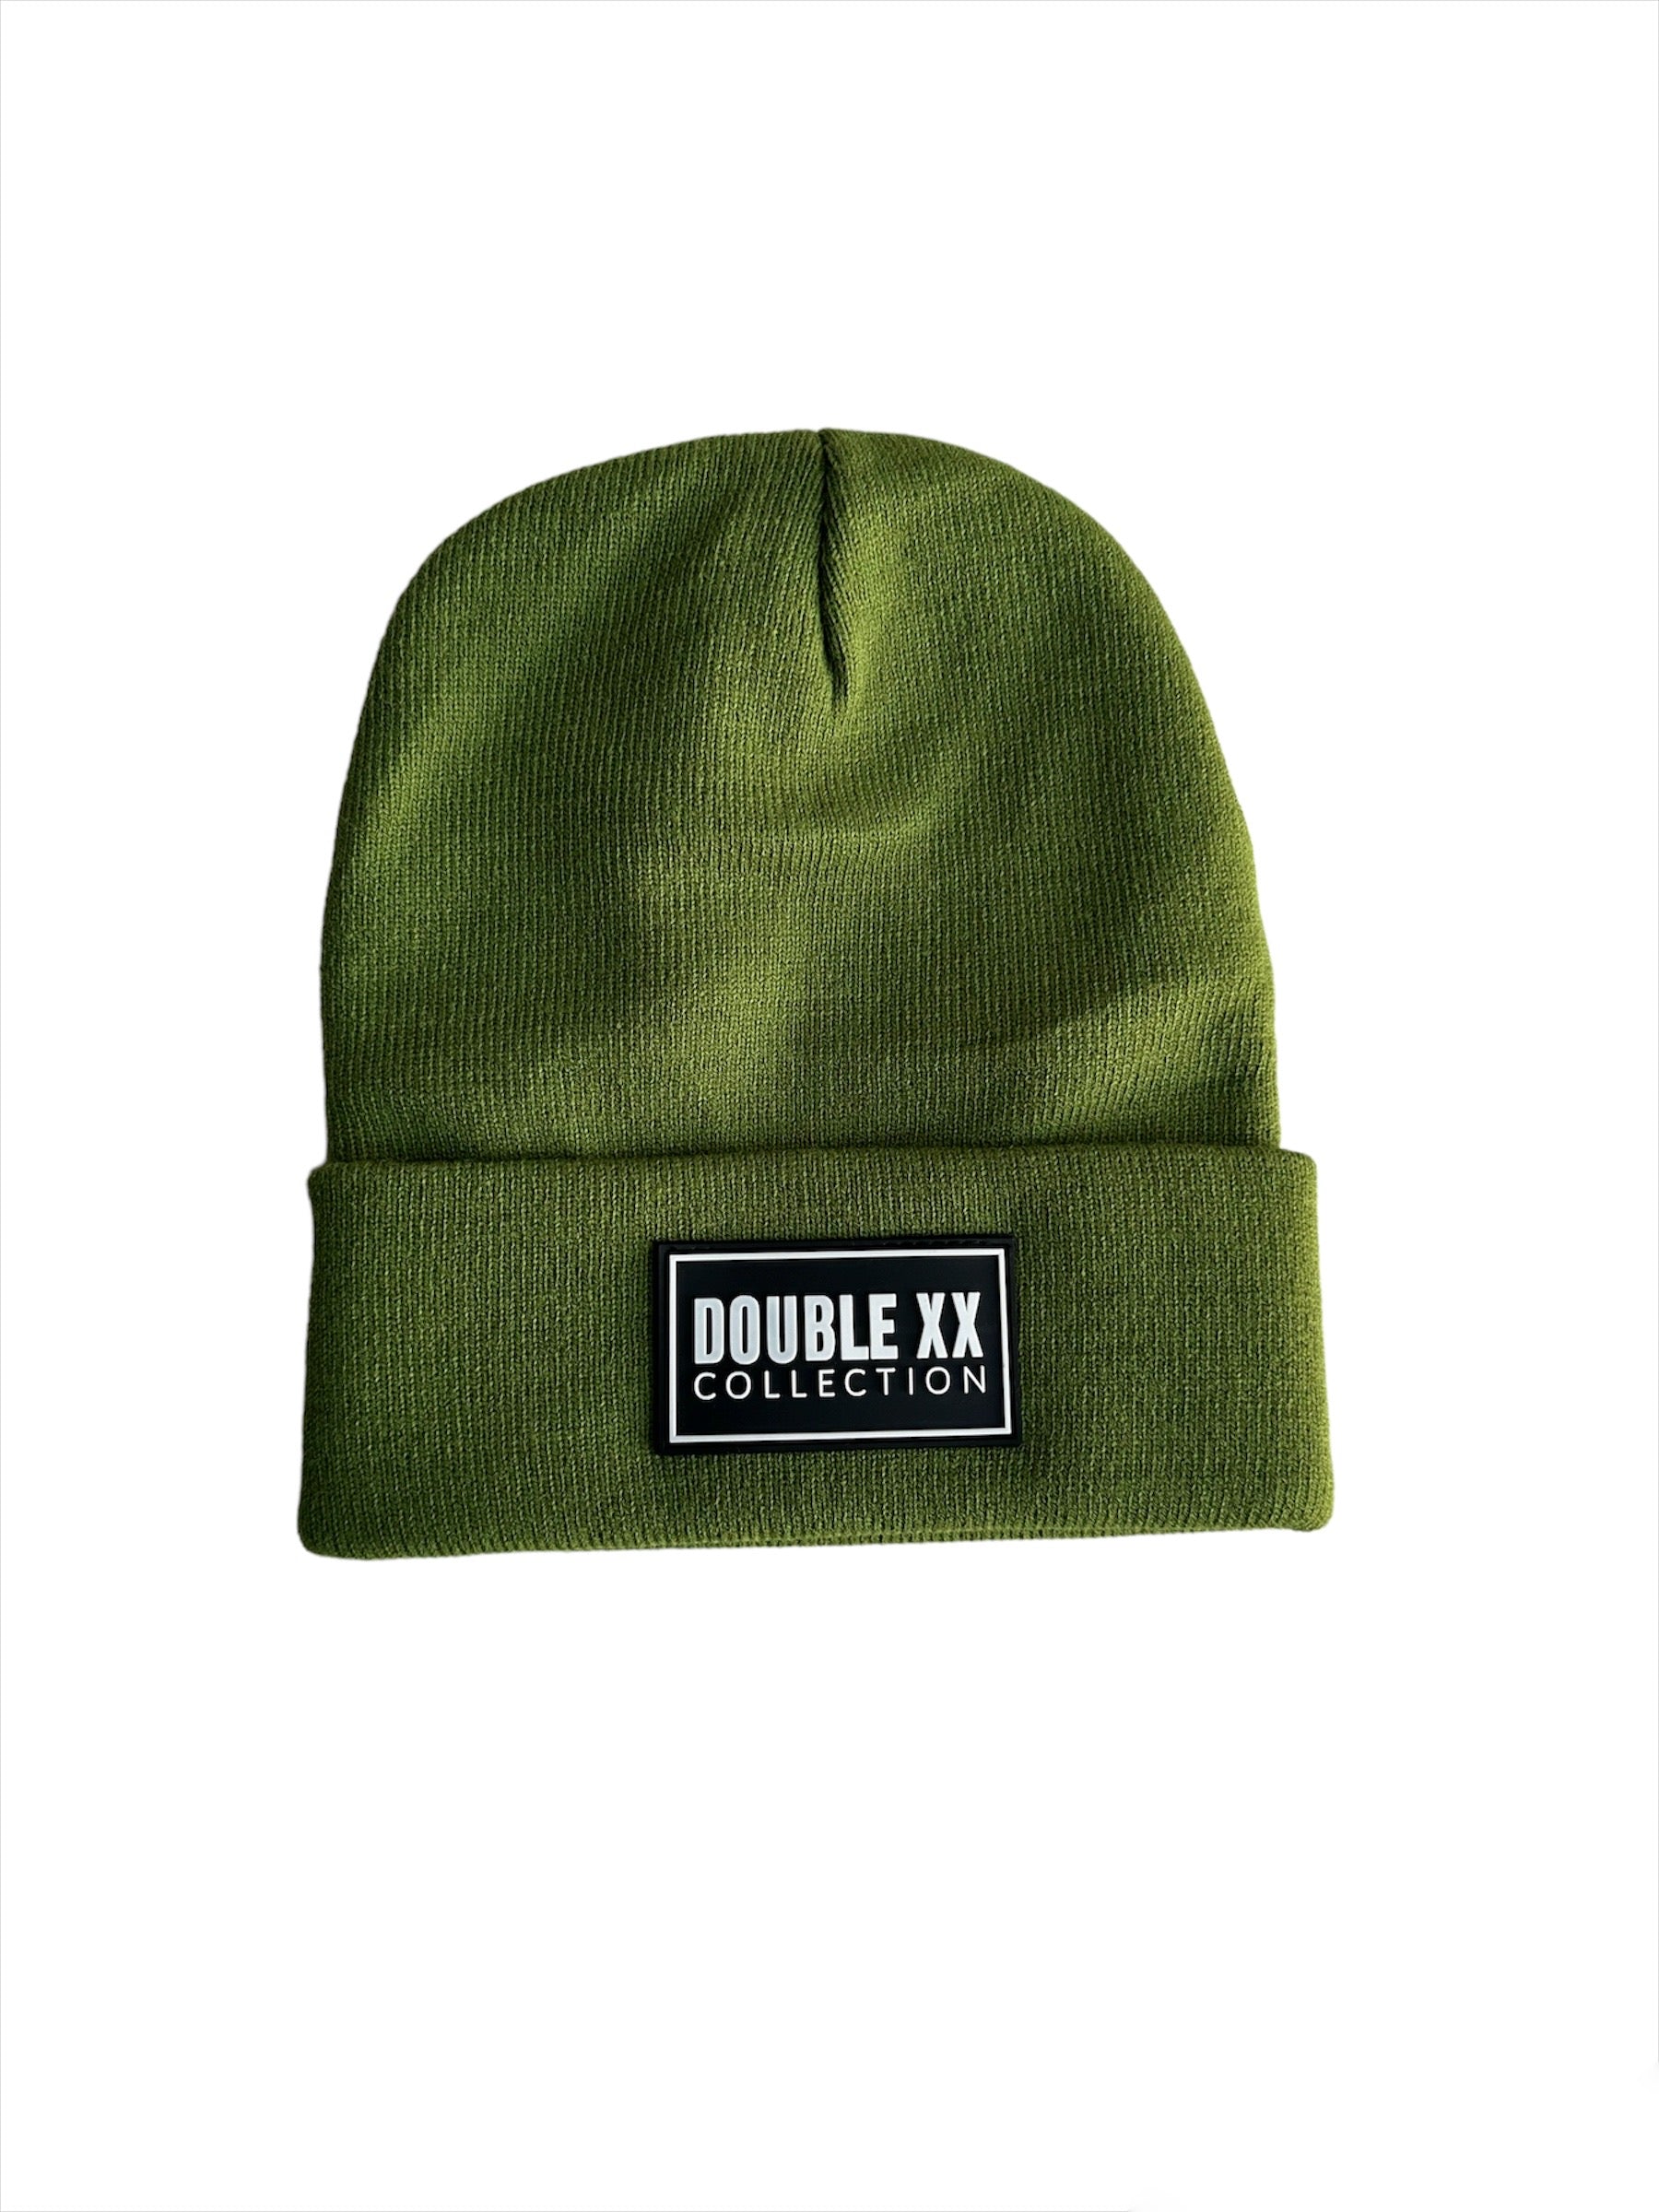 Signature Beanies - Olive Green